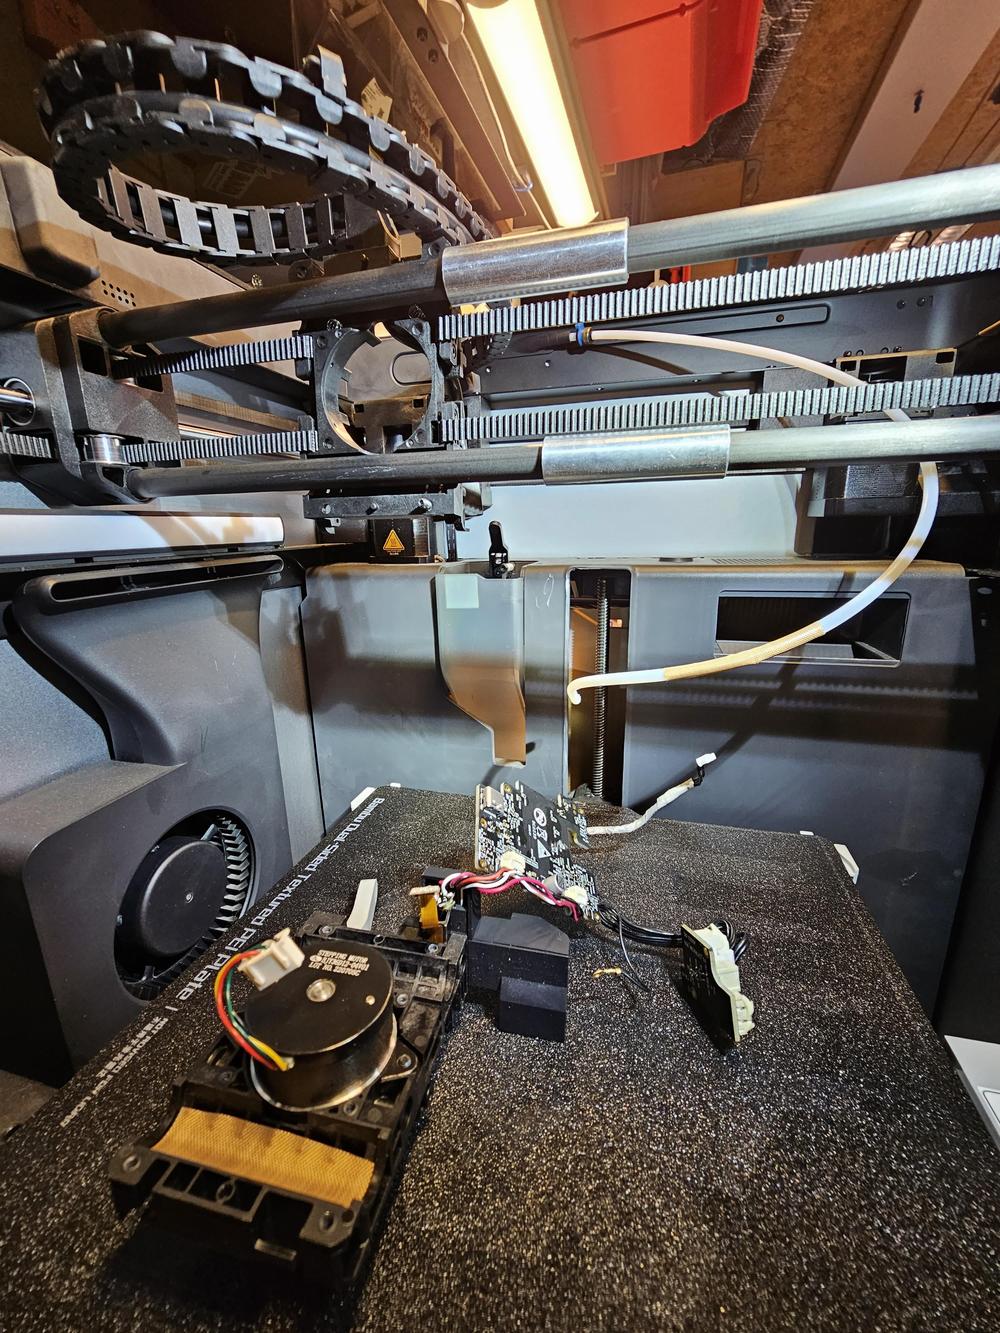 A 3D printer with its cover removed and a circuit board exposed.